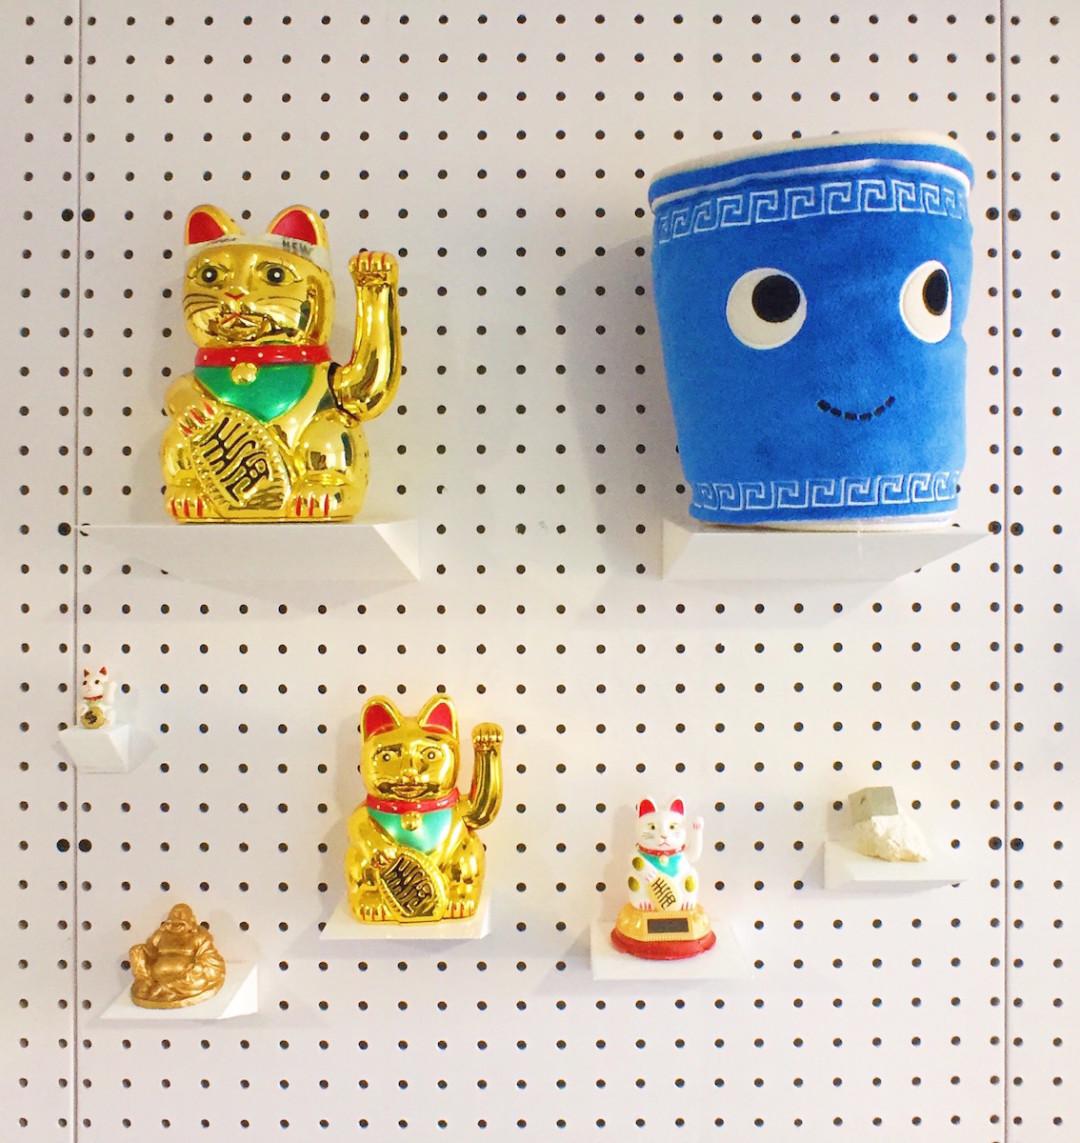 Here's a 3D Printable and Customizable Pegboard to Organize Every Room